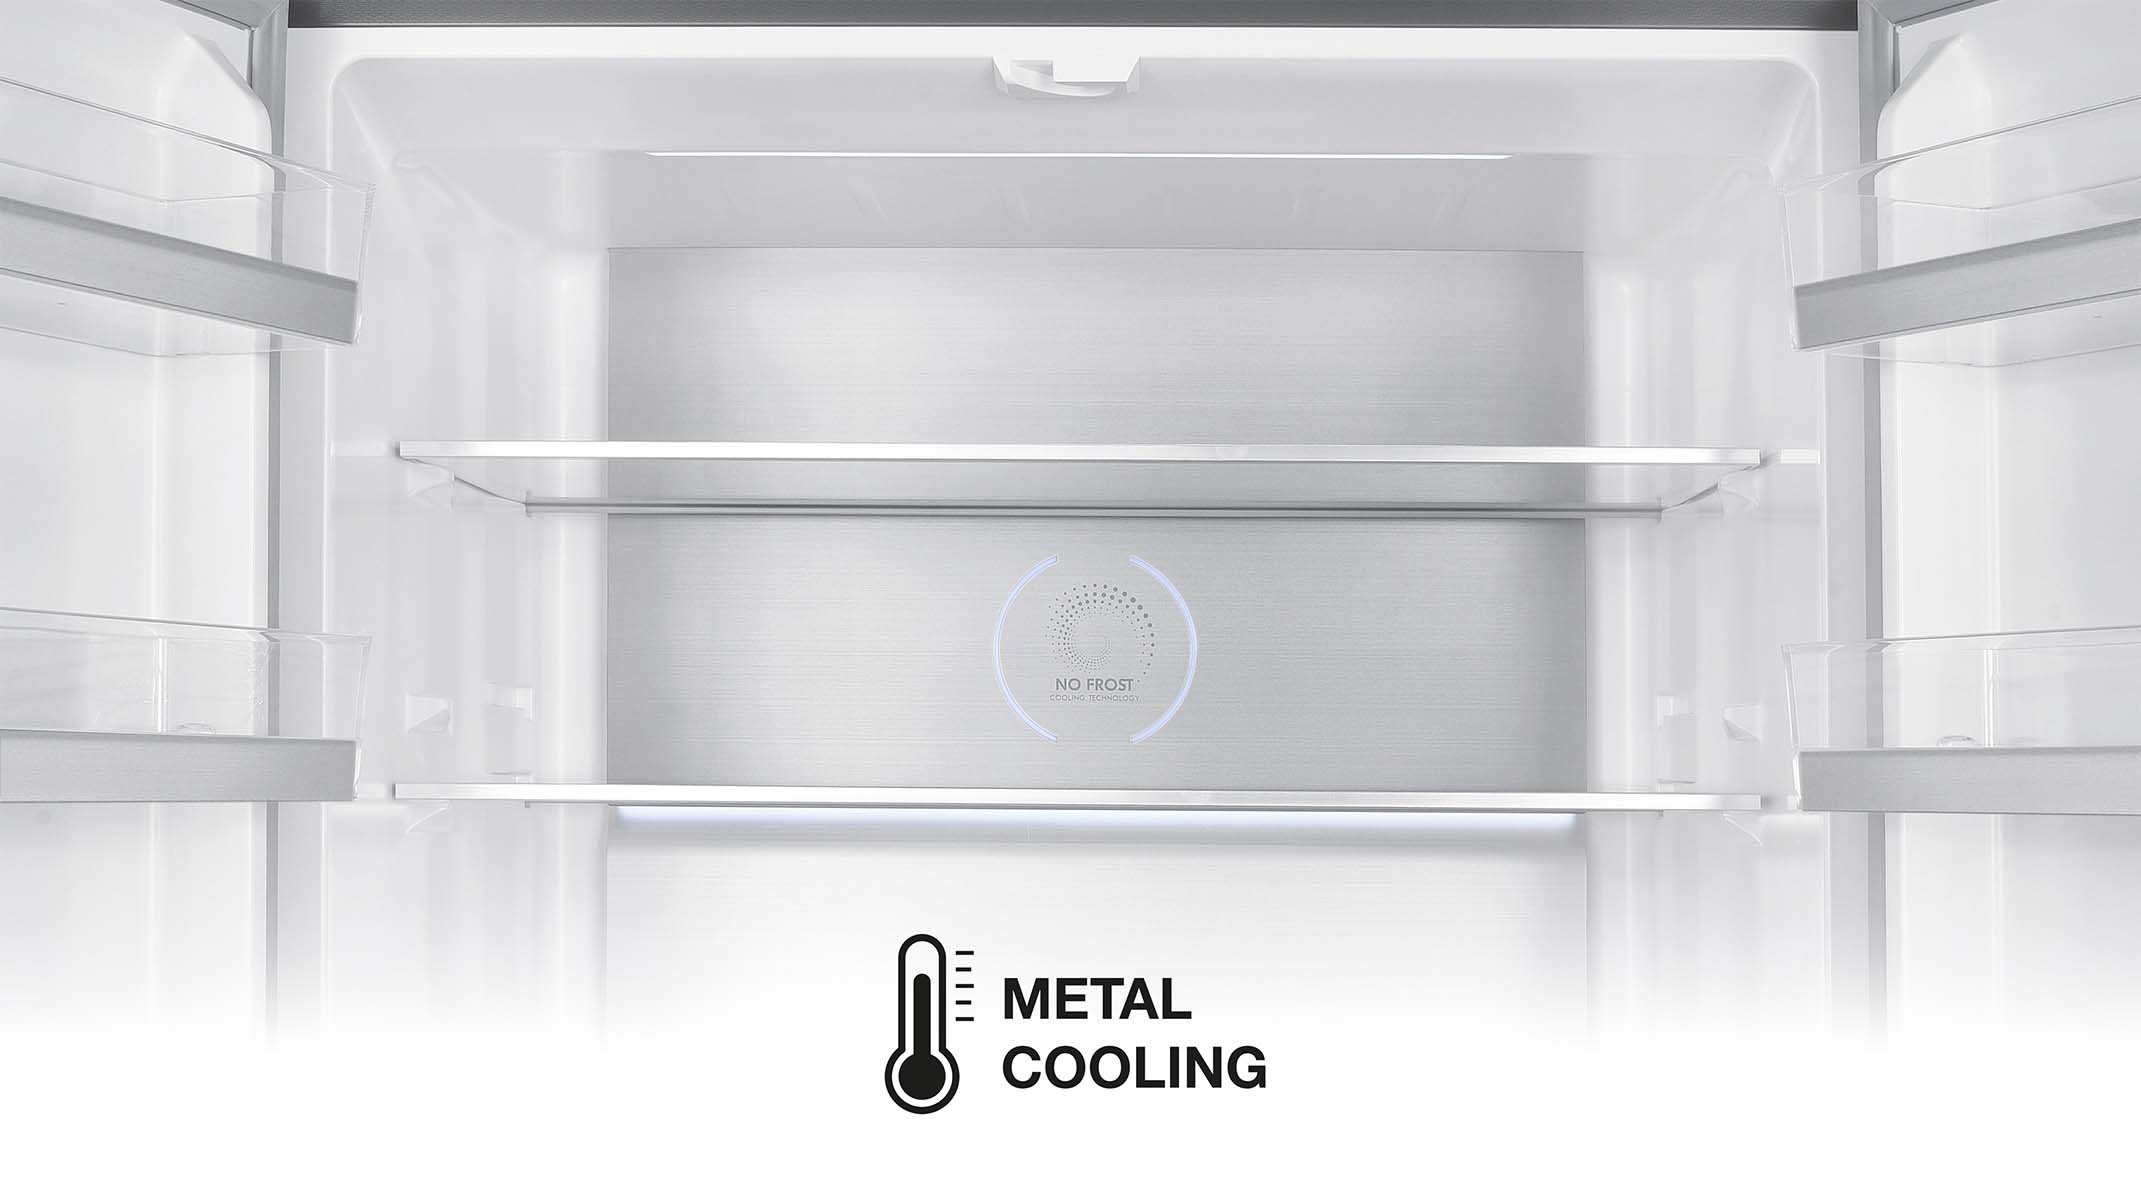 Metal Cooling: Faster and stable cooling